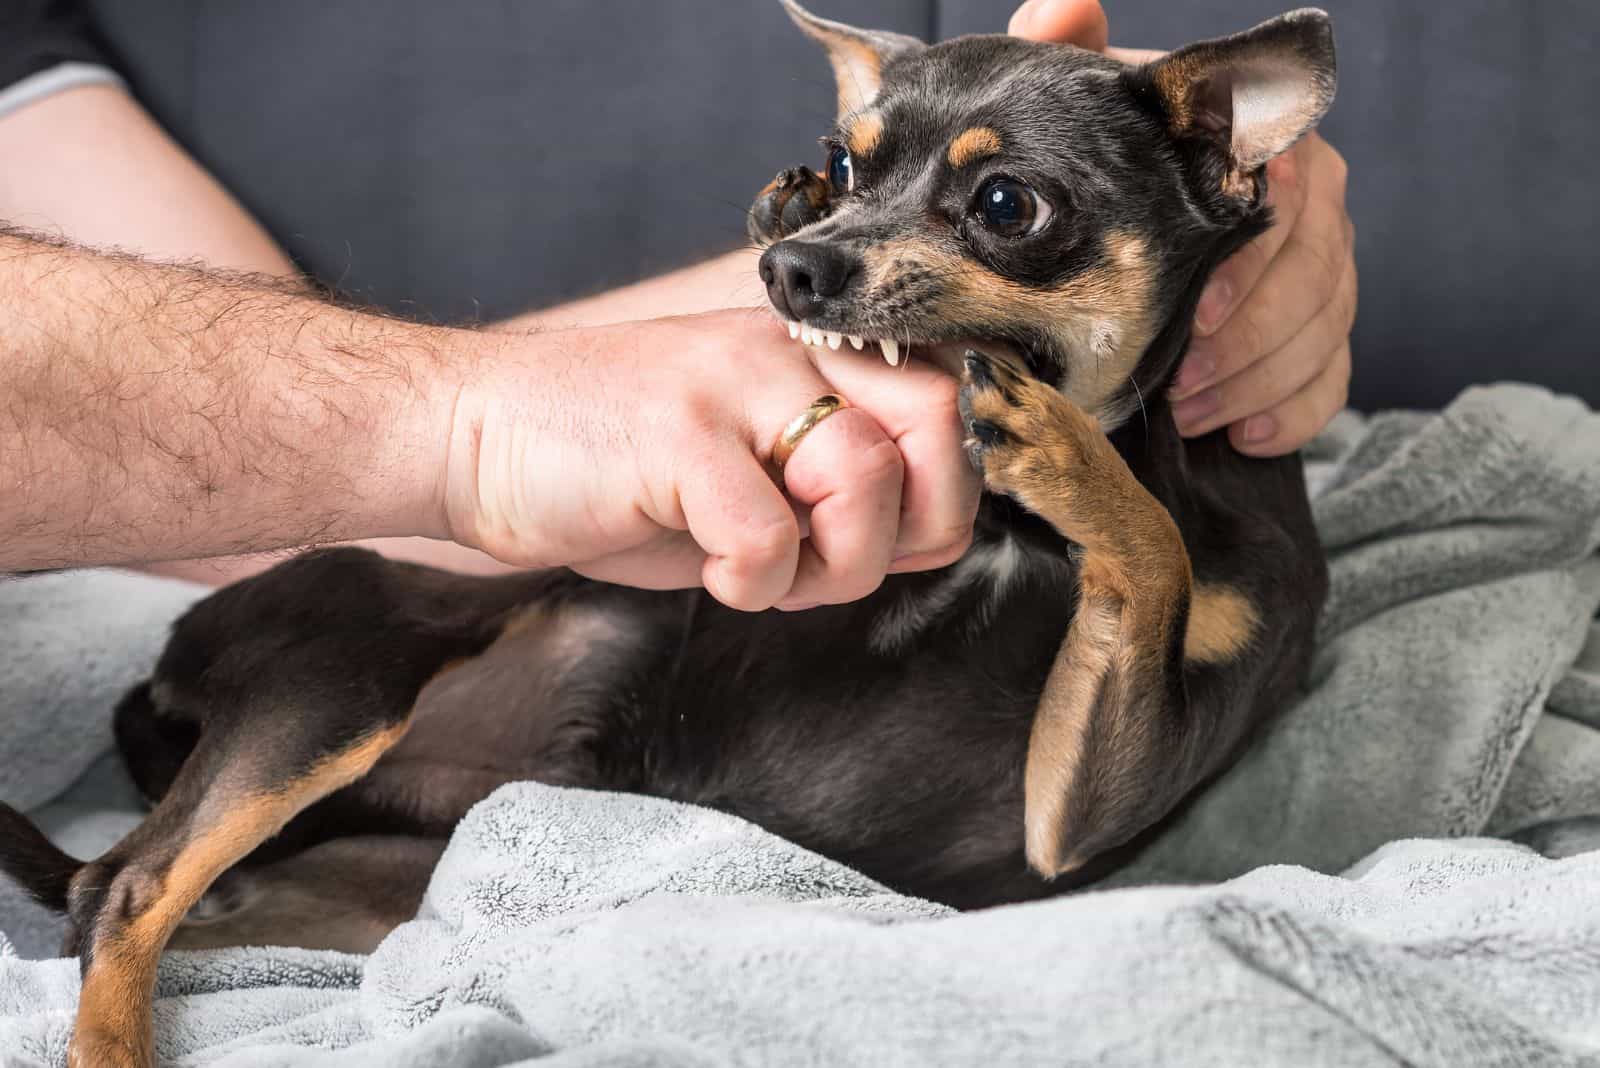 an angry Chihuahua bites a man's hand